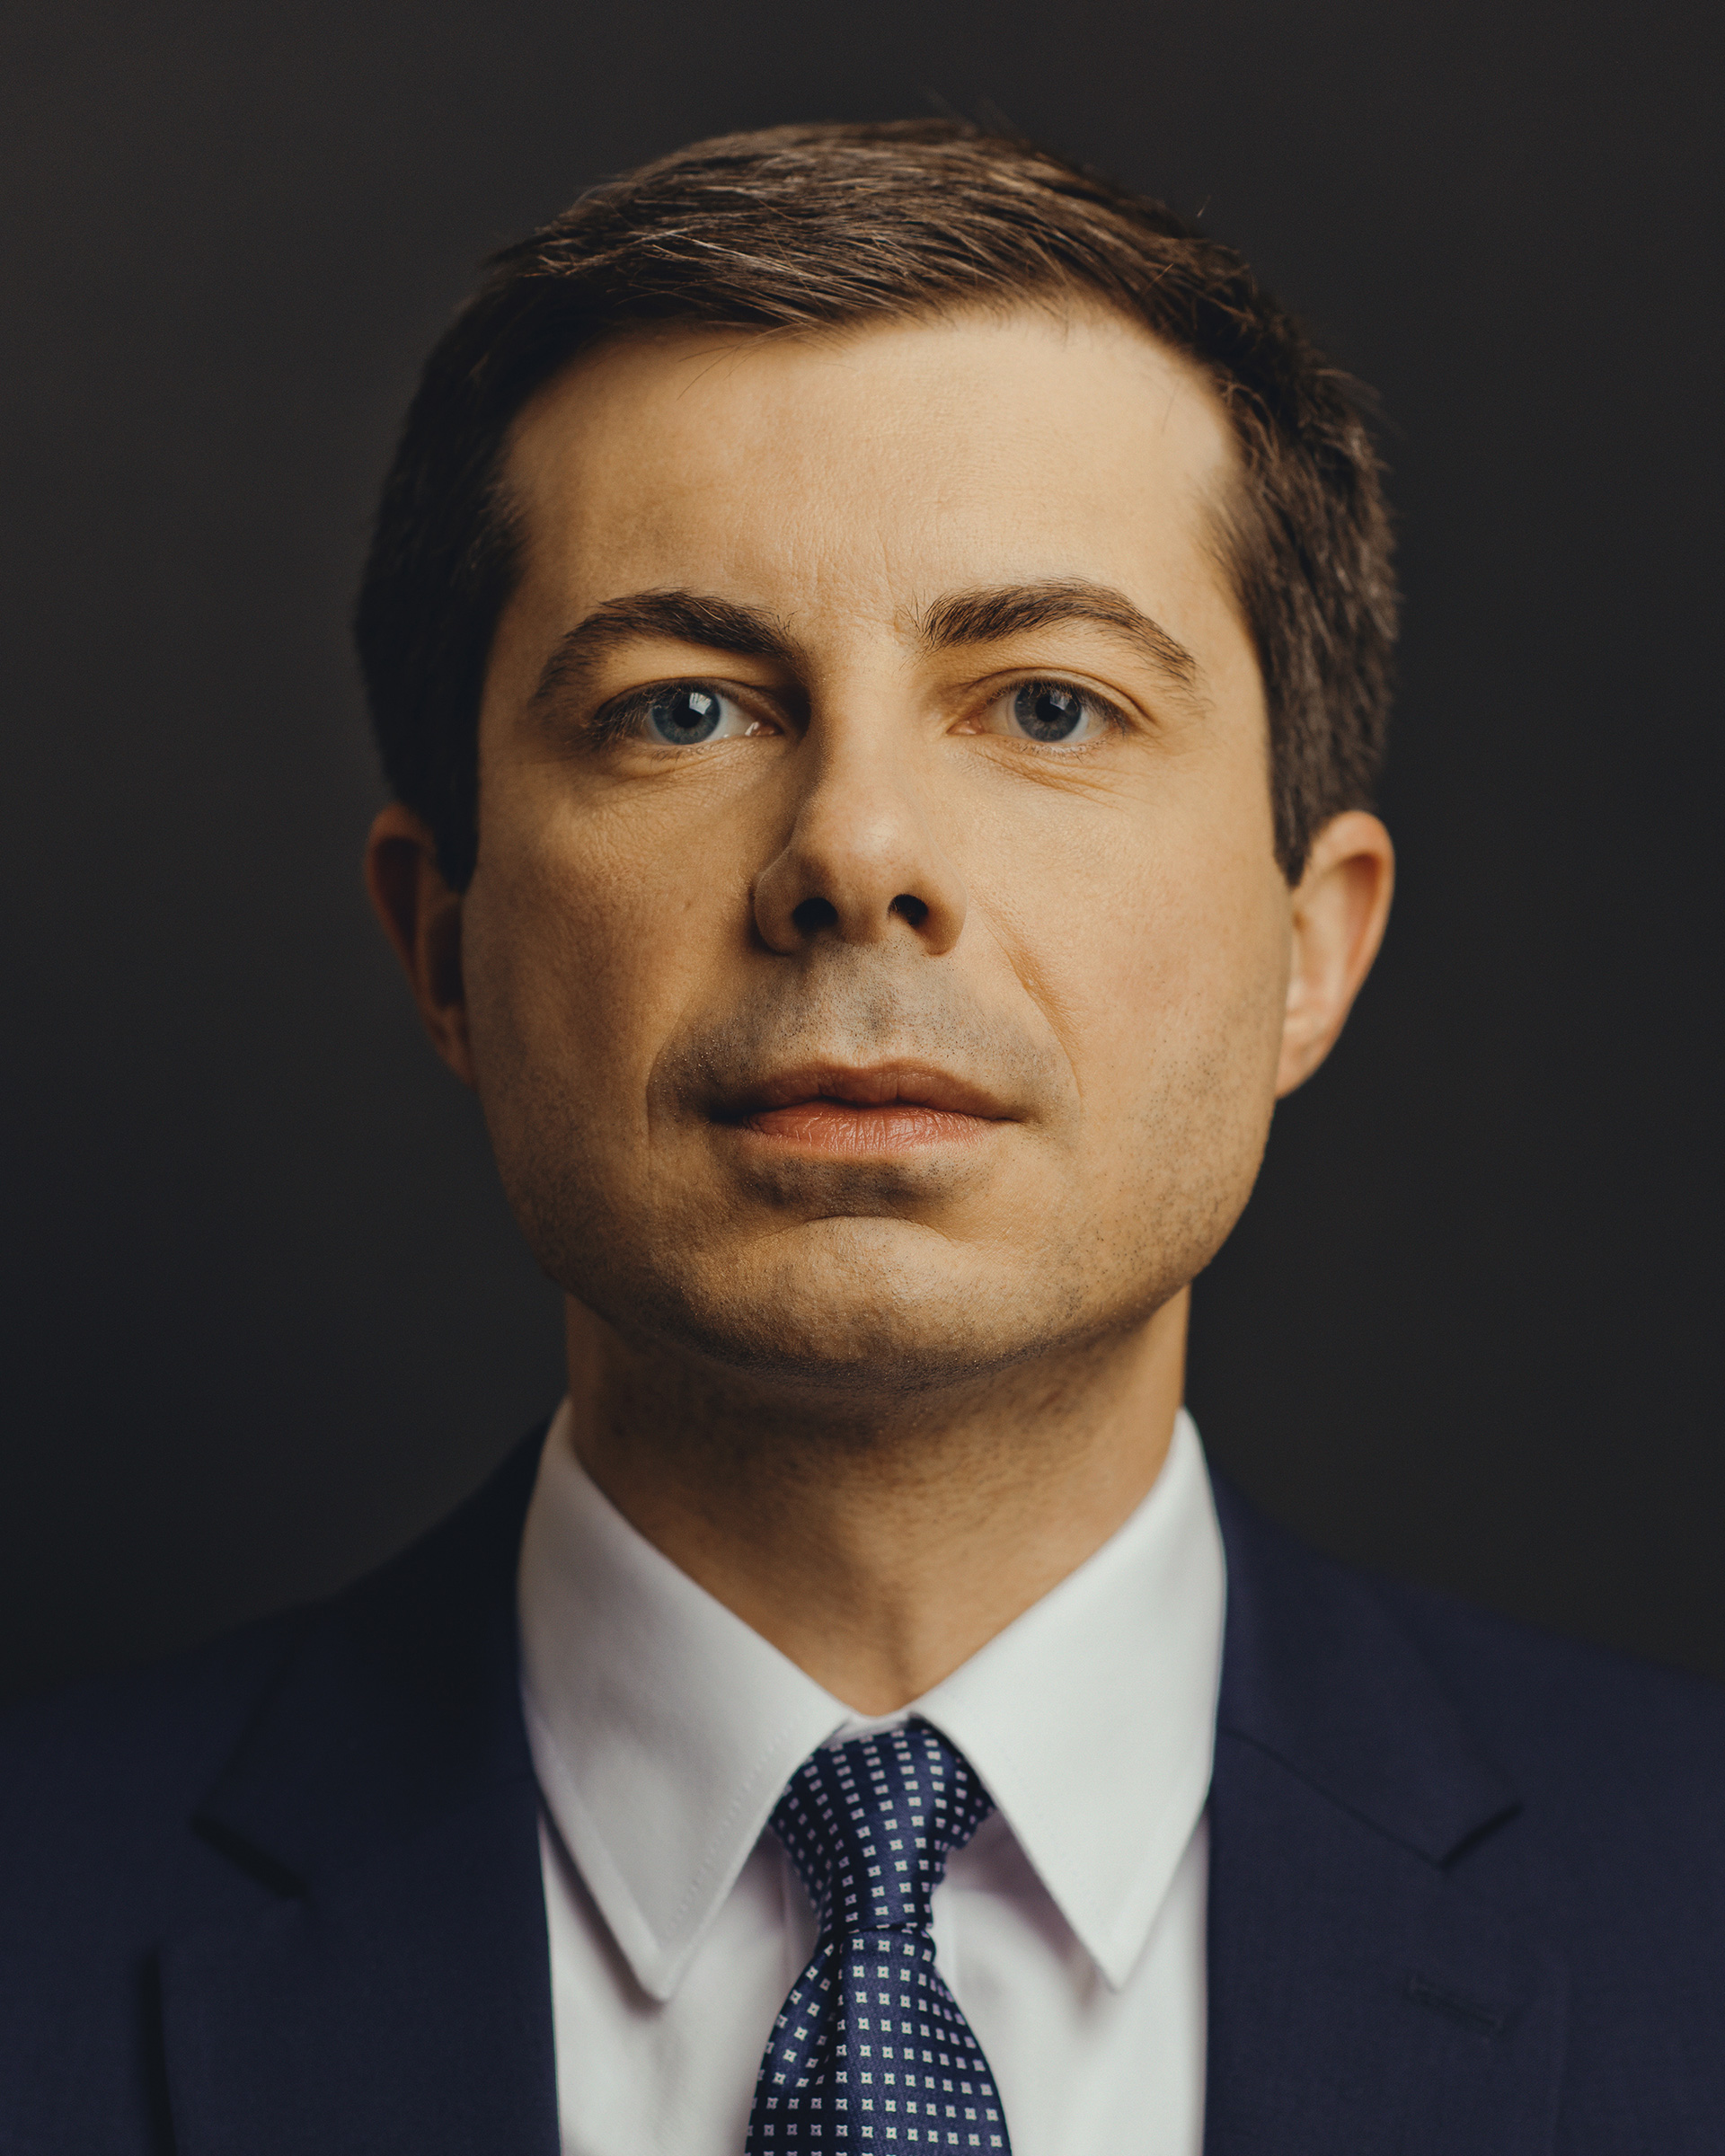 Mayor Peter Buttigieg photographed at home in South Bend, Ind. (Ryan Pfluger for TIME)